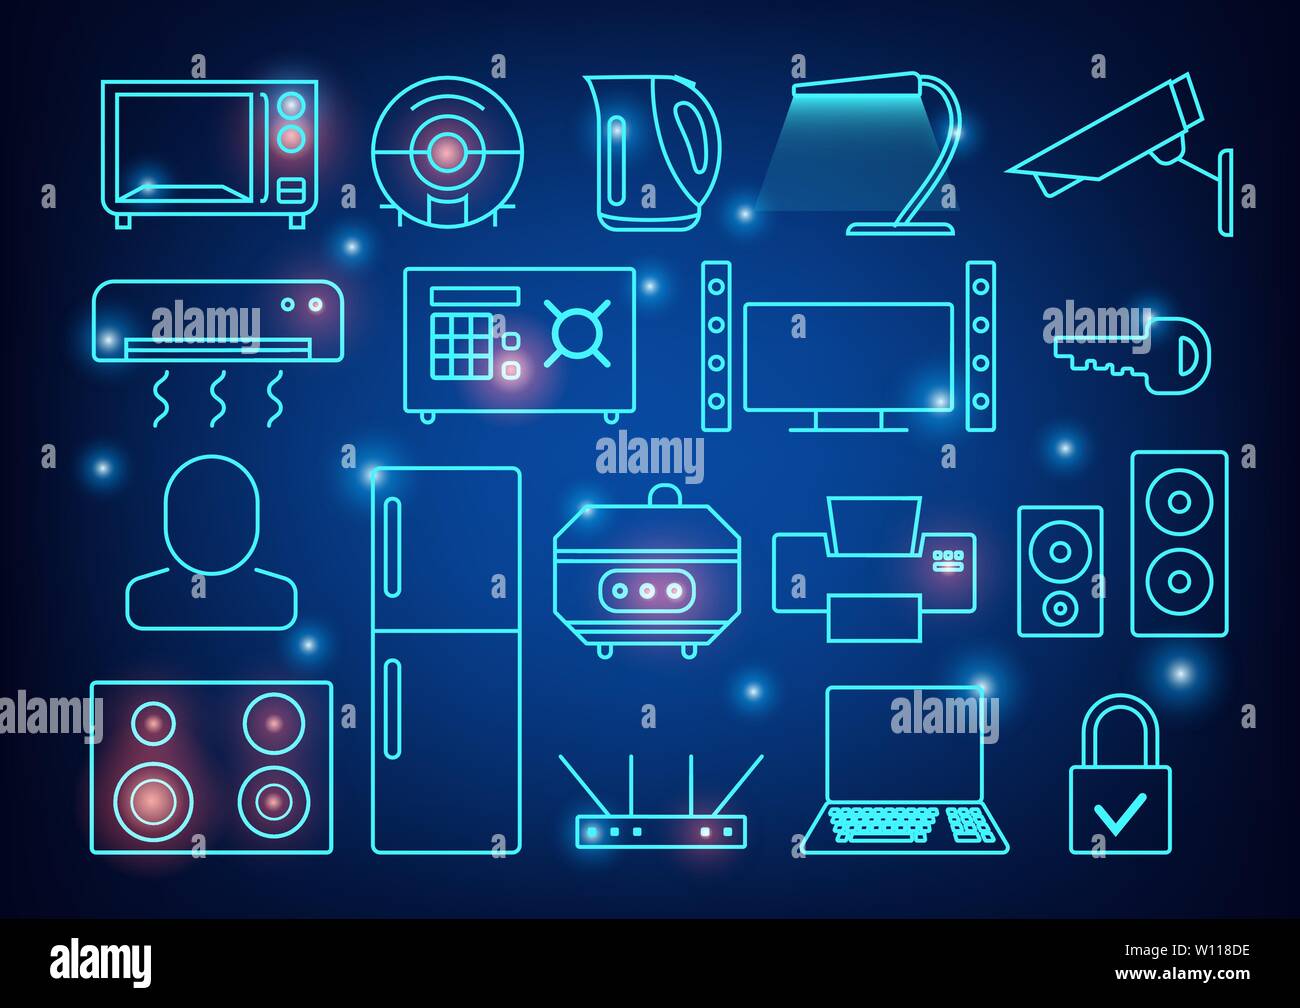 Smart home automation vector background. Connected smart home devices like phone, smart watch, tablet, sensors, appliances. Network of connected Stock Vector